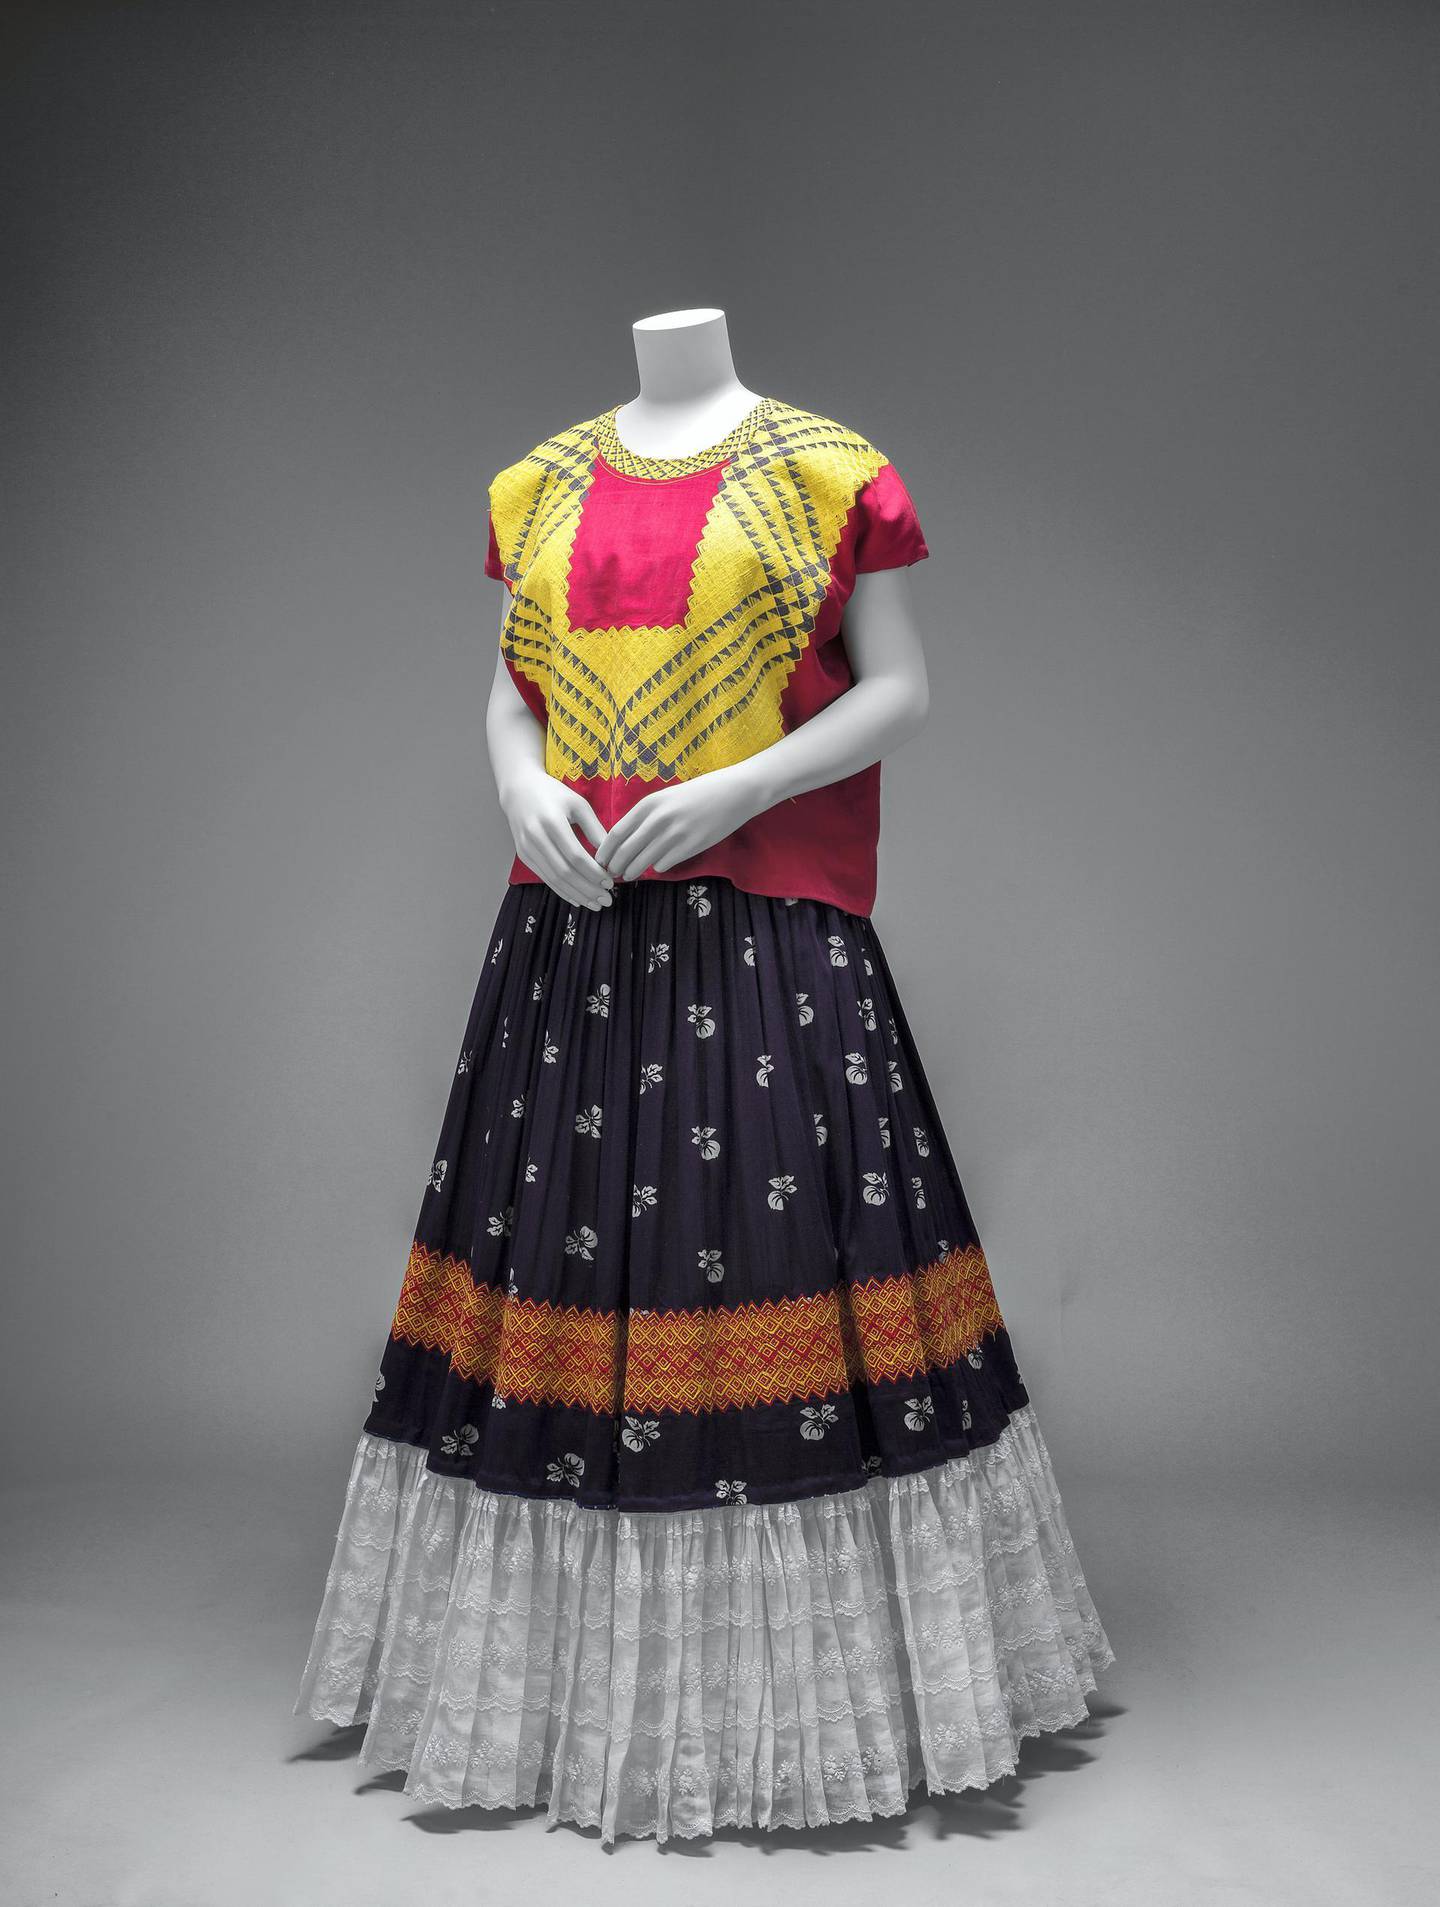 Frida Kahlo’s favoured outfit: a huipil blouse and skirt. Javier Hinojosa